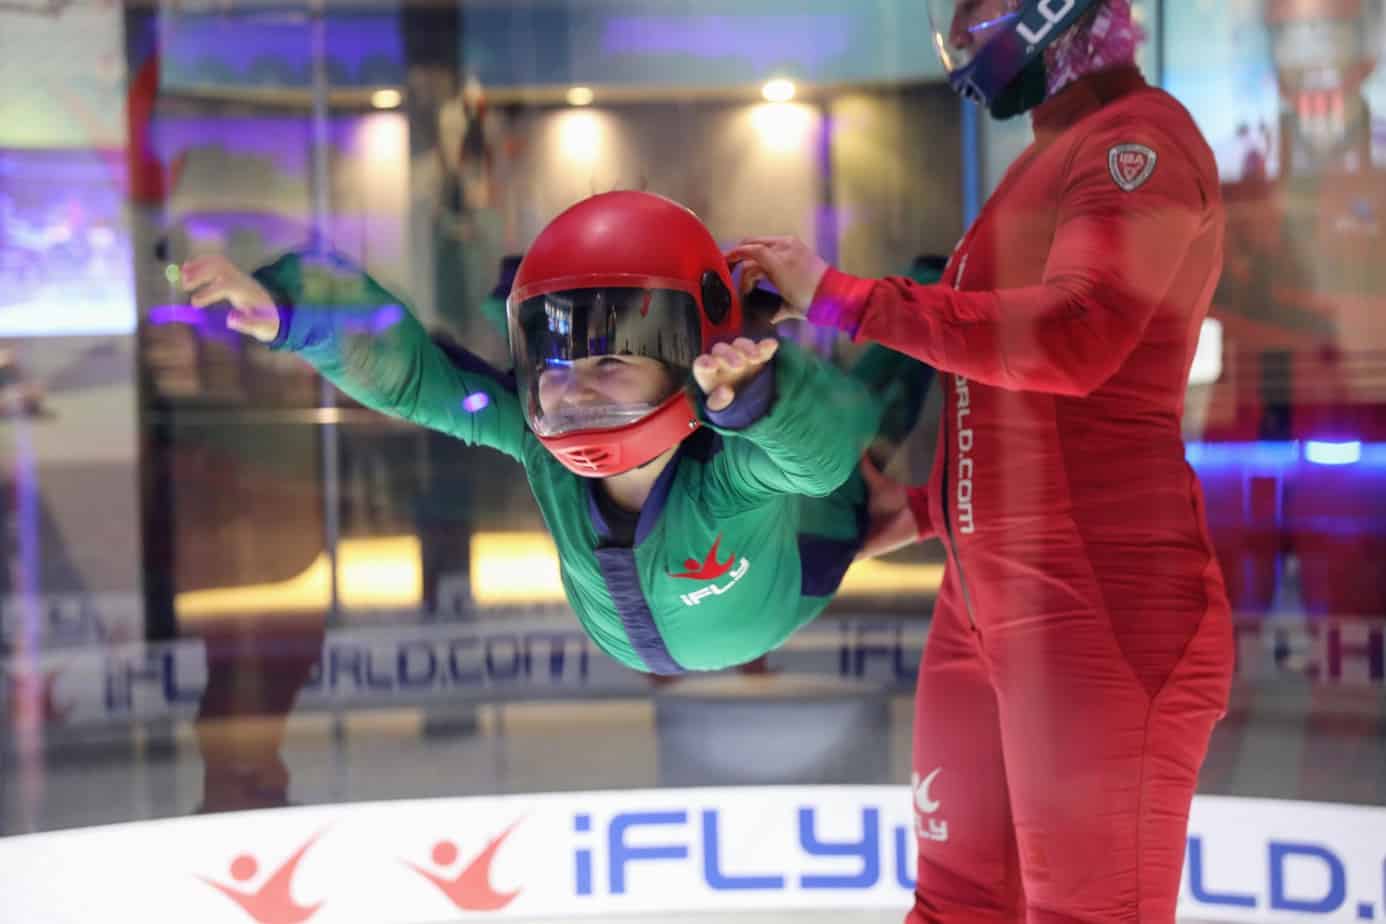 Child indoor skydiving at iFLY Westchester in NYC